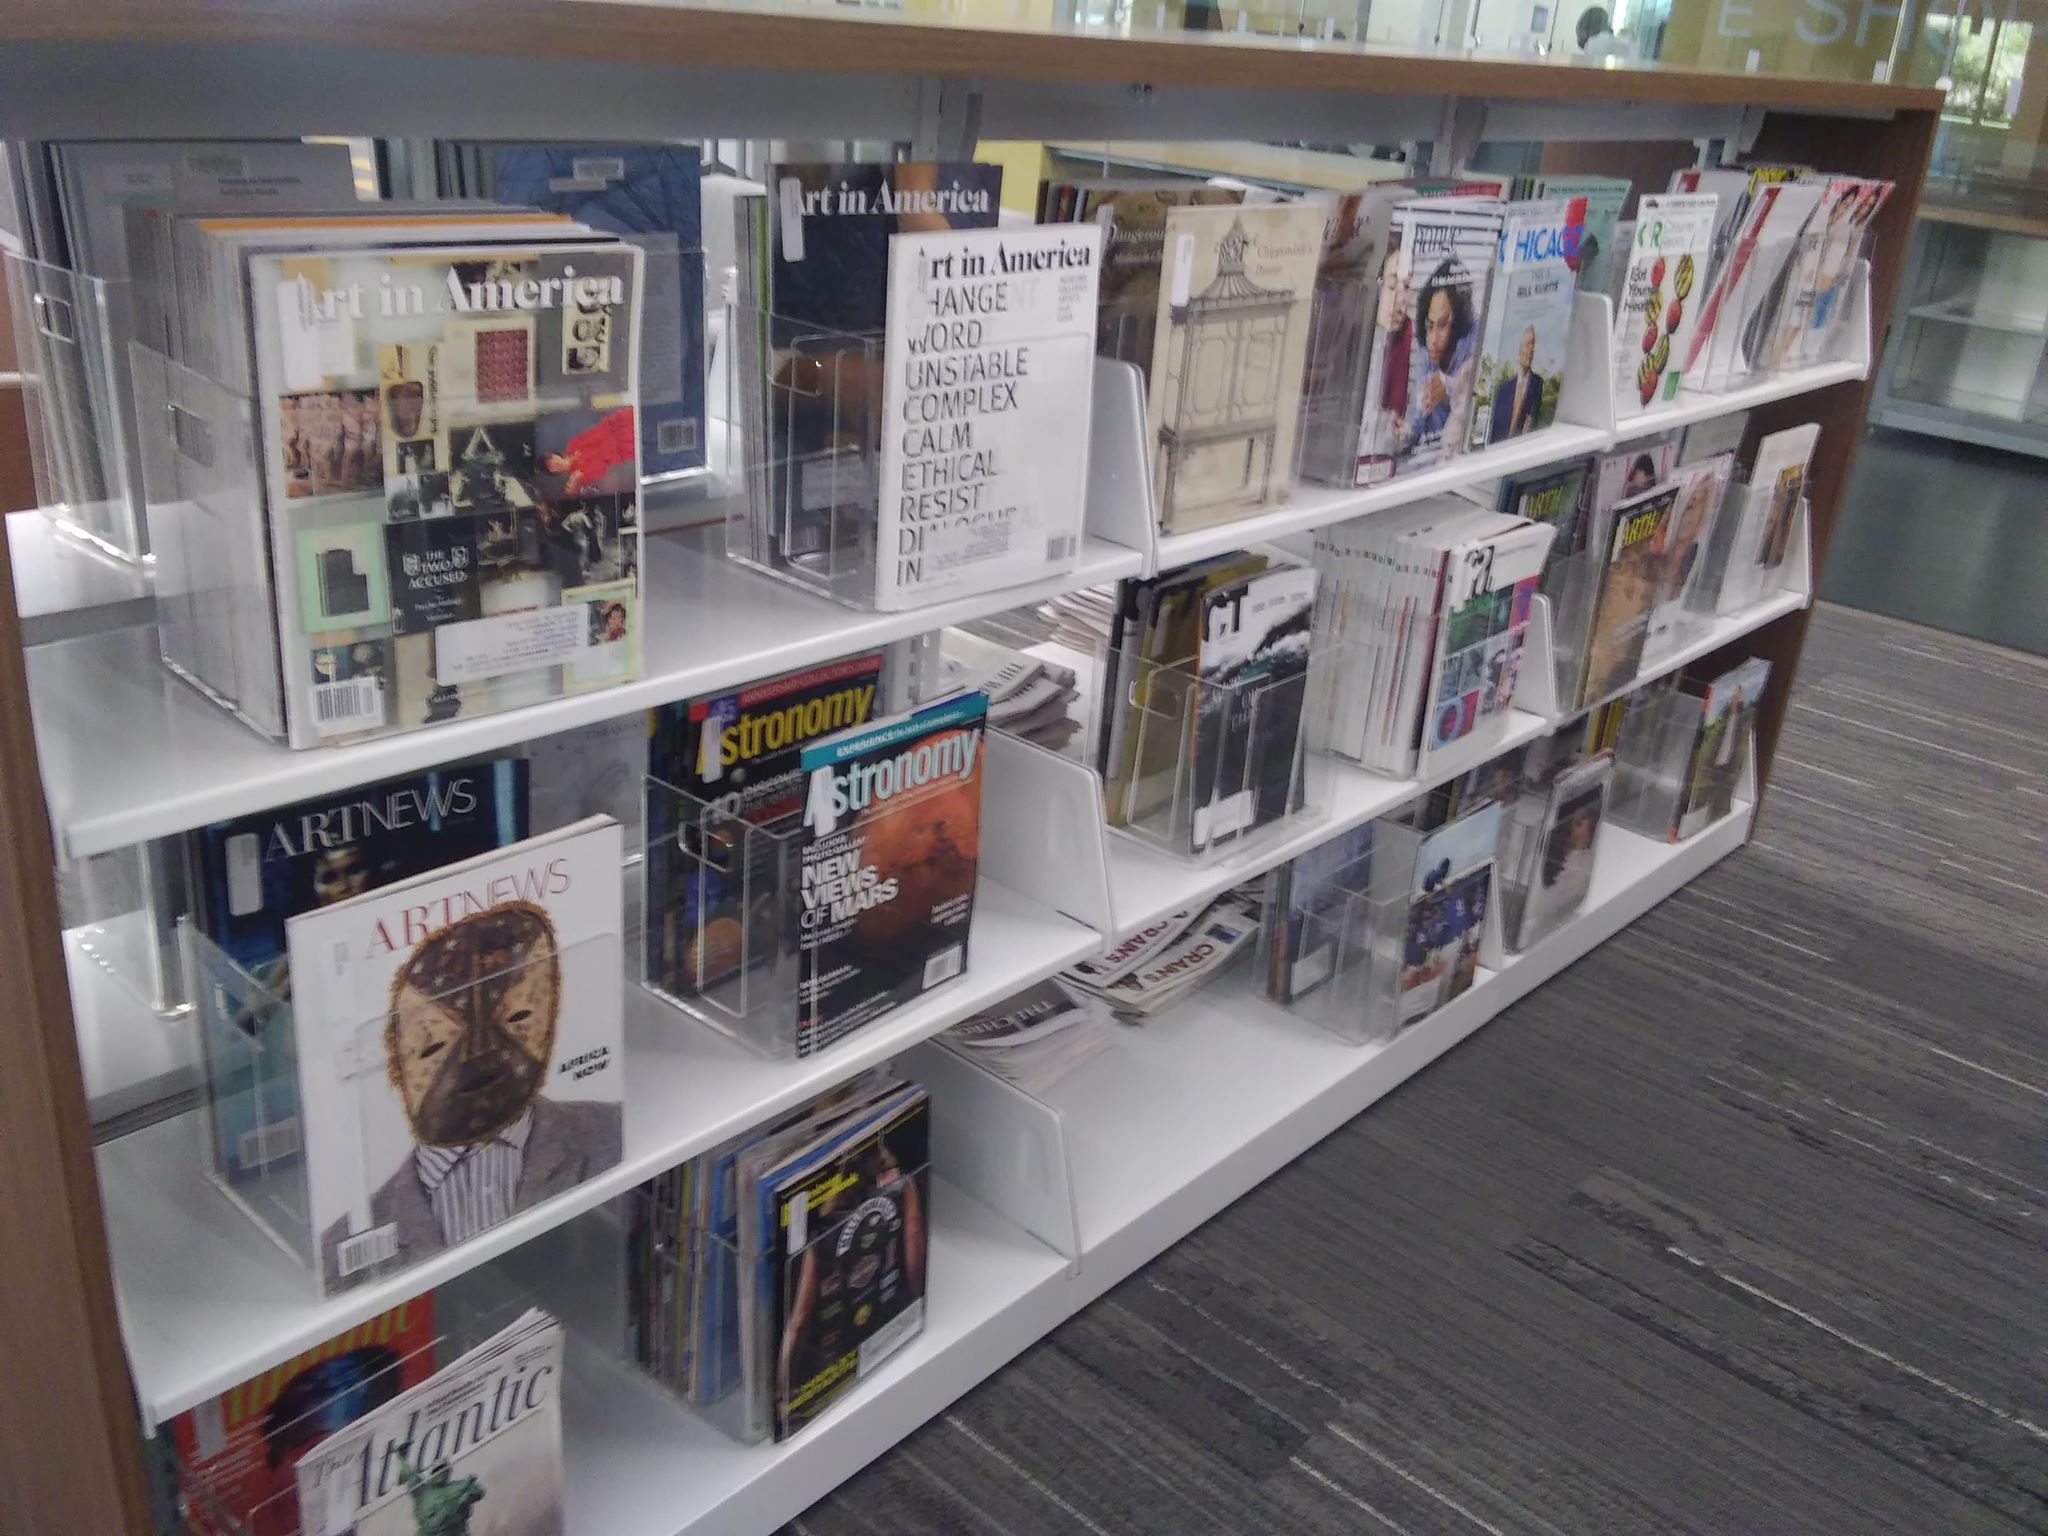 Magazine shelving located on the 2nd floor of the library